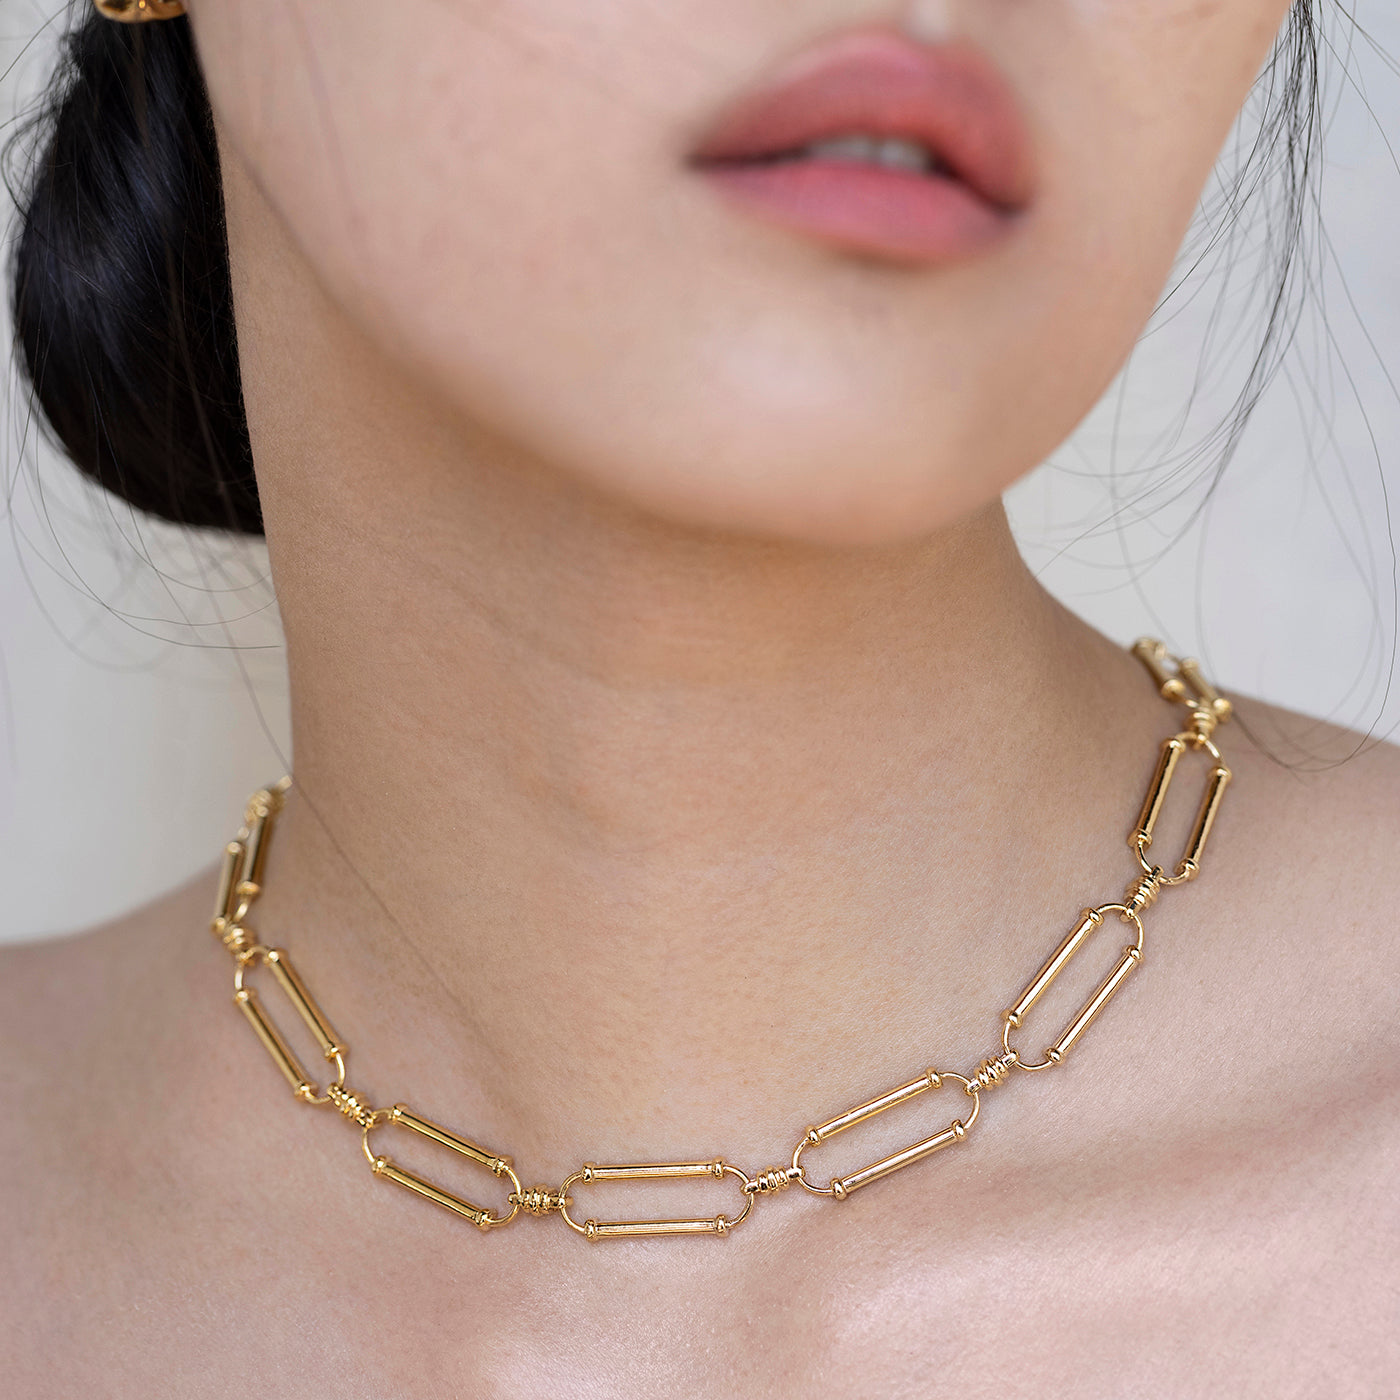 Close Up of Woman's Neck Wearing an Ethical Gold Oval Link Necklace Hanging Just to the Collarbone